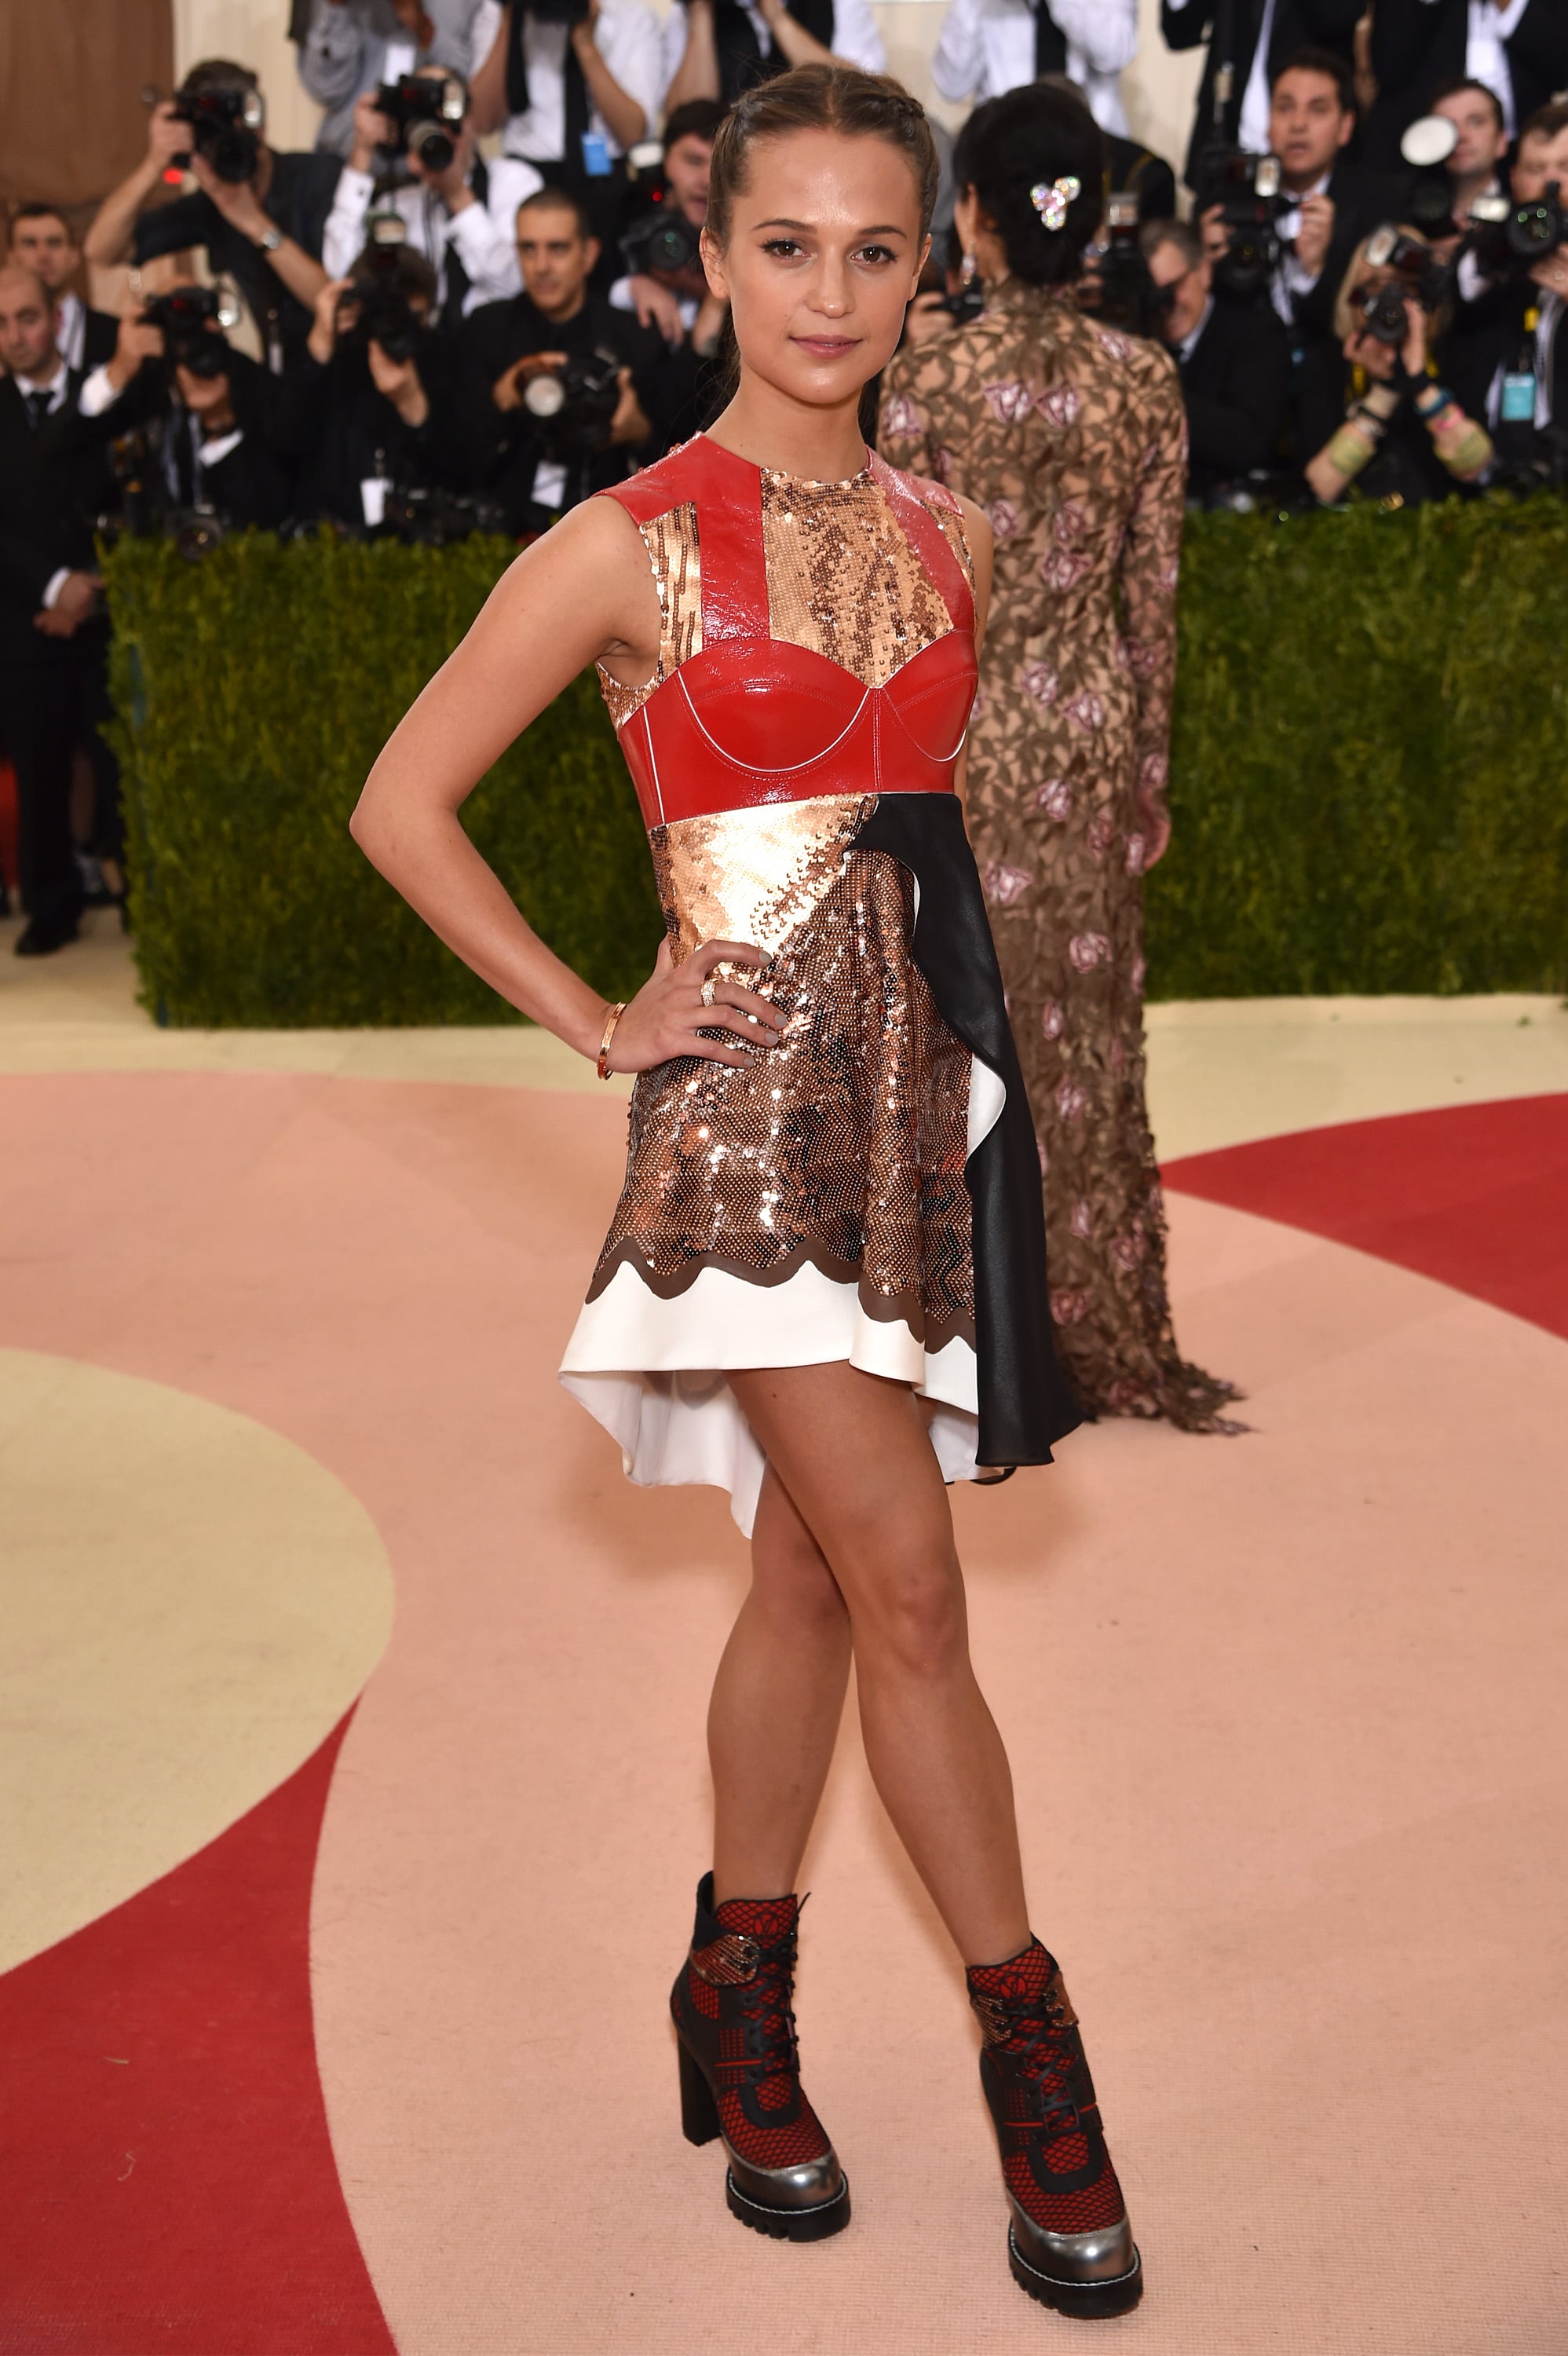 Alicia Vikander dances at the 2016 Met Gala, Last year's Met Gala had the  stars dancing in a futuristic light tunnel. What will this year's bring?, By Stellar